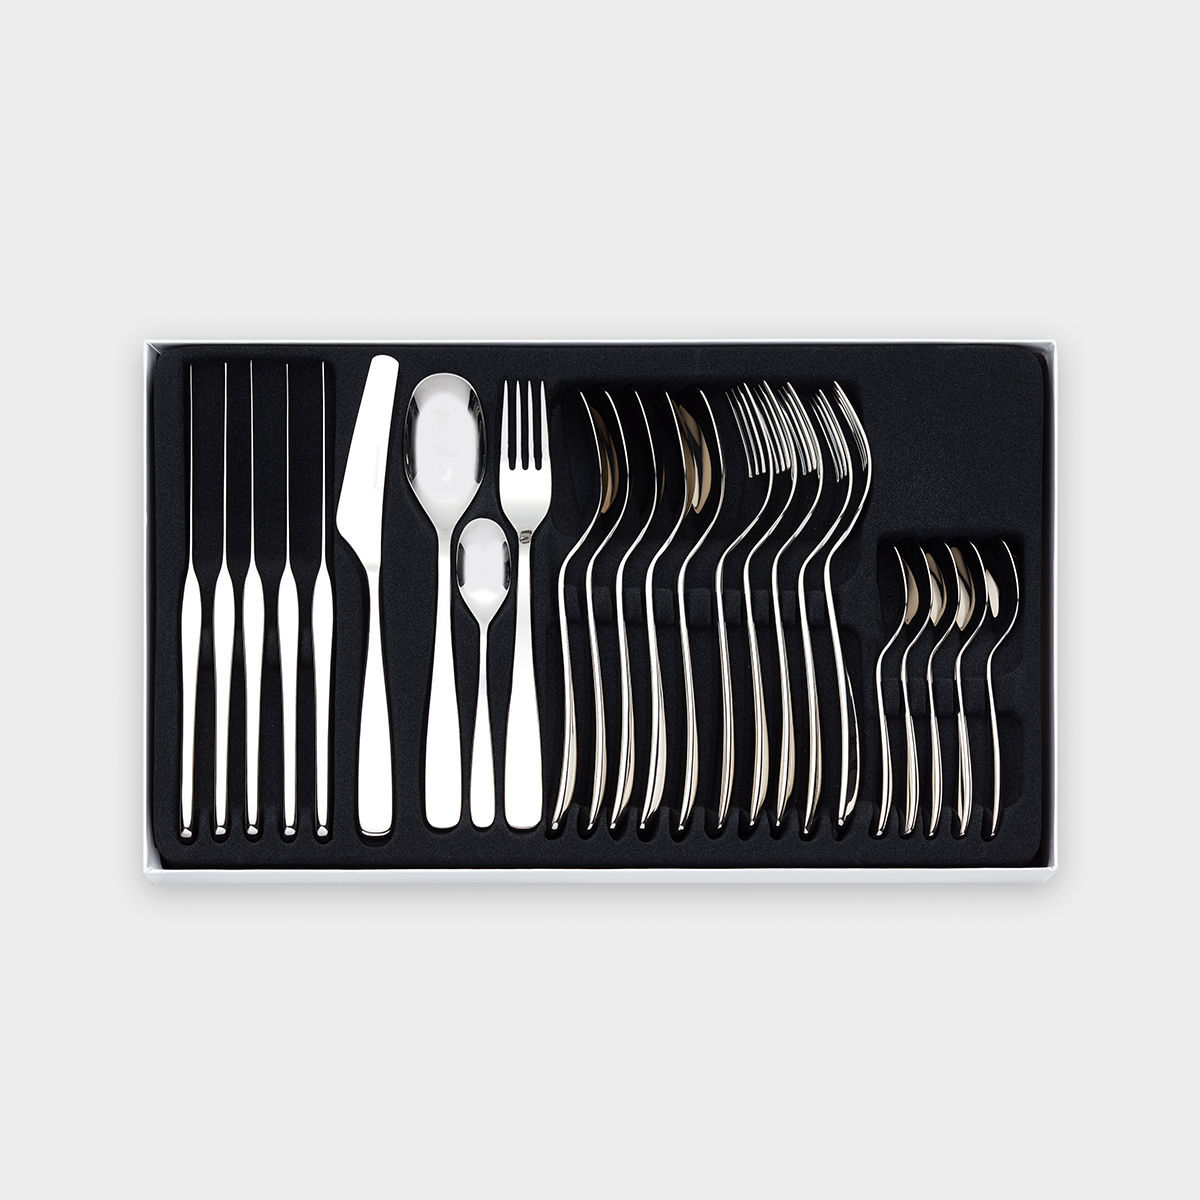 Tuva cutlery set 24 pieces product image